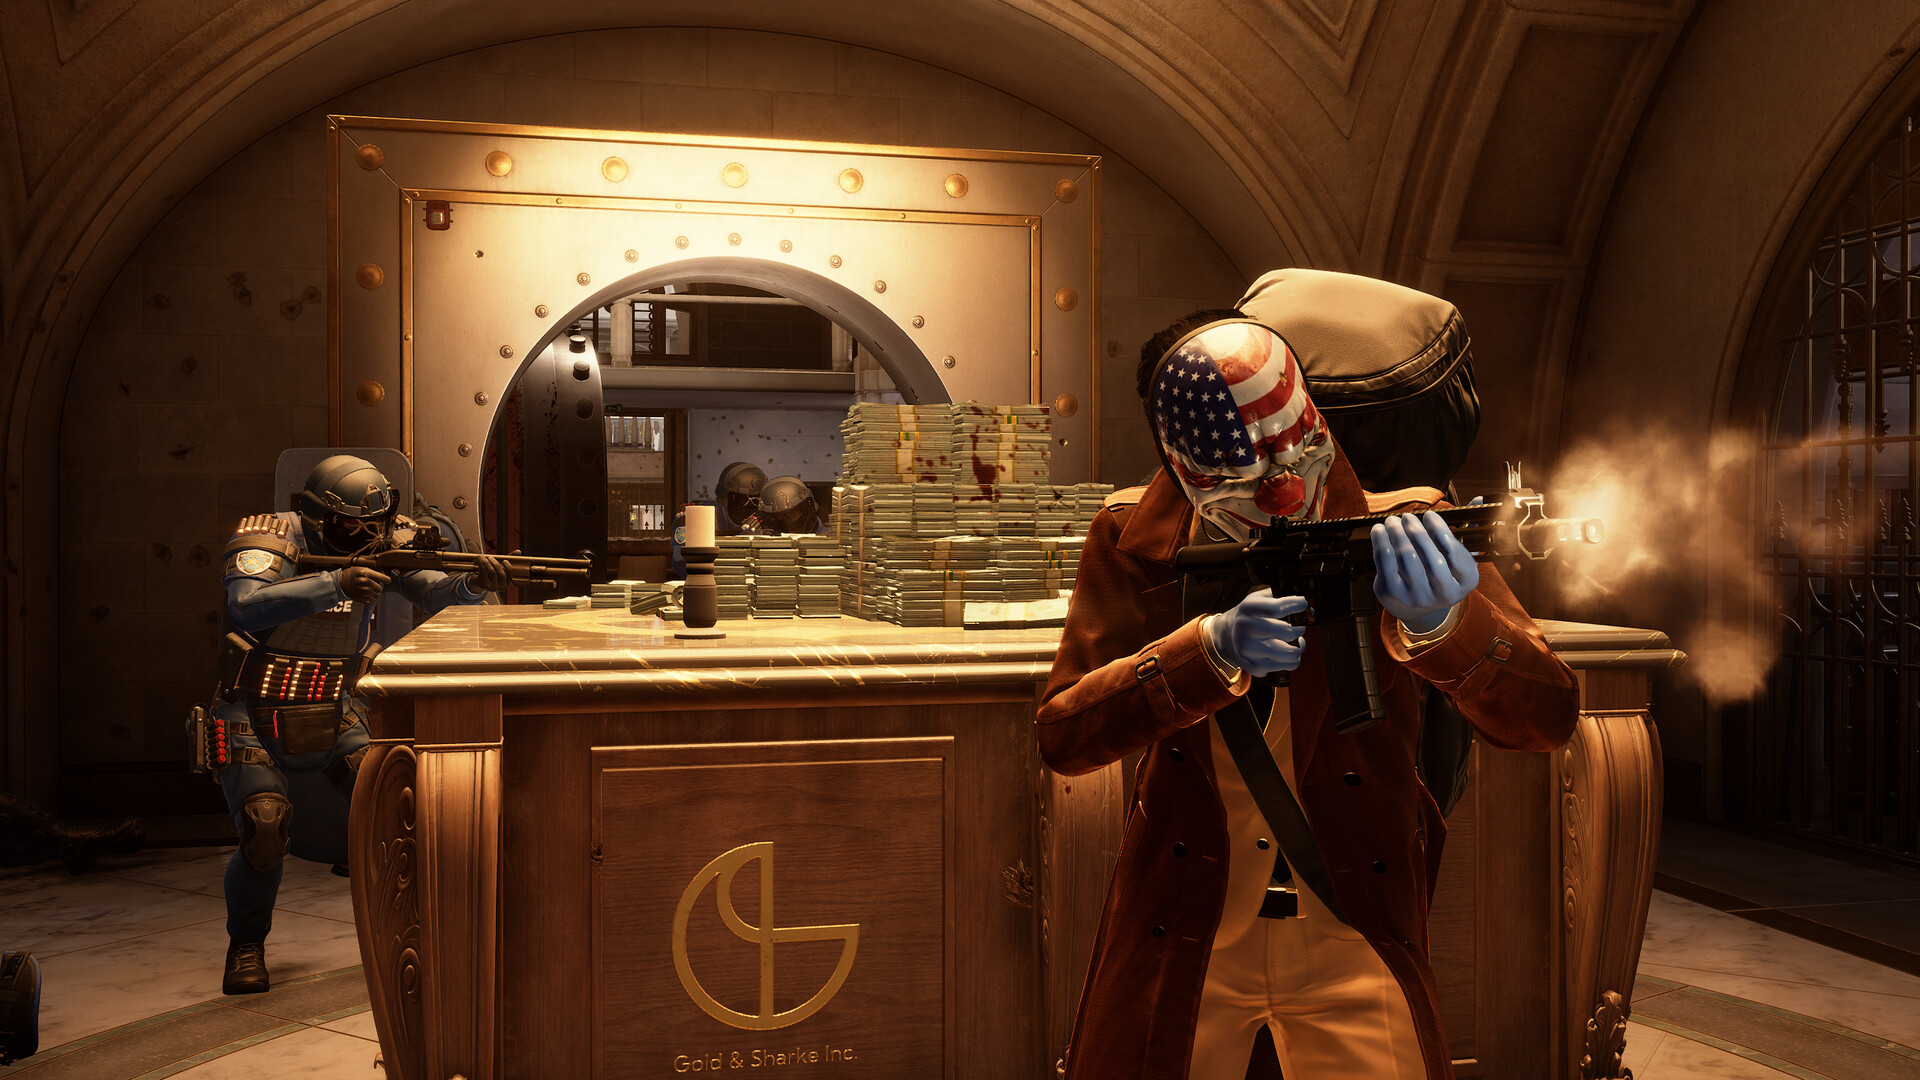 Payday 3 gives controversial Denuvo the boot less than a week from release